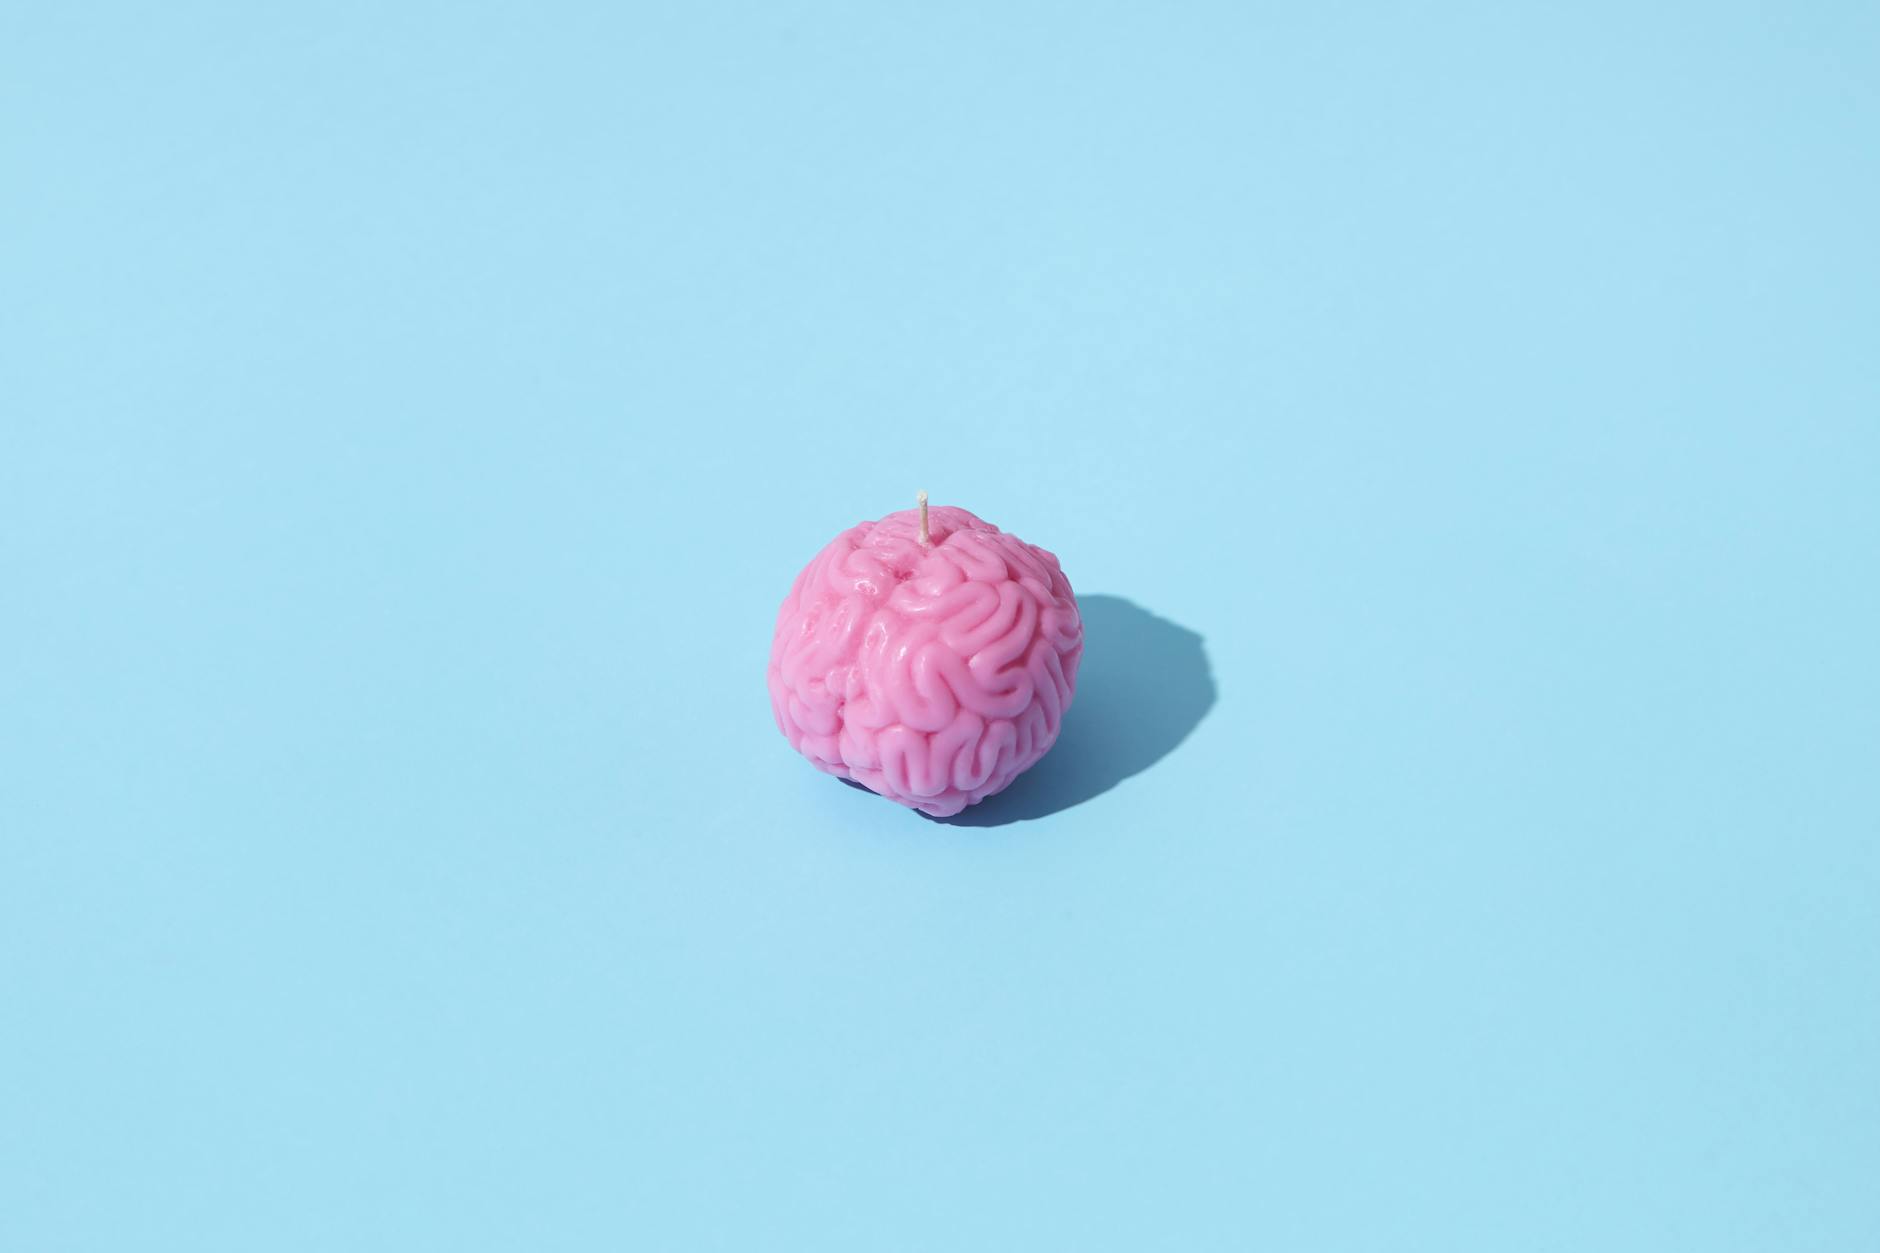 photograph of a brain on a blue surface